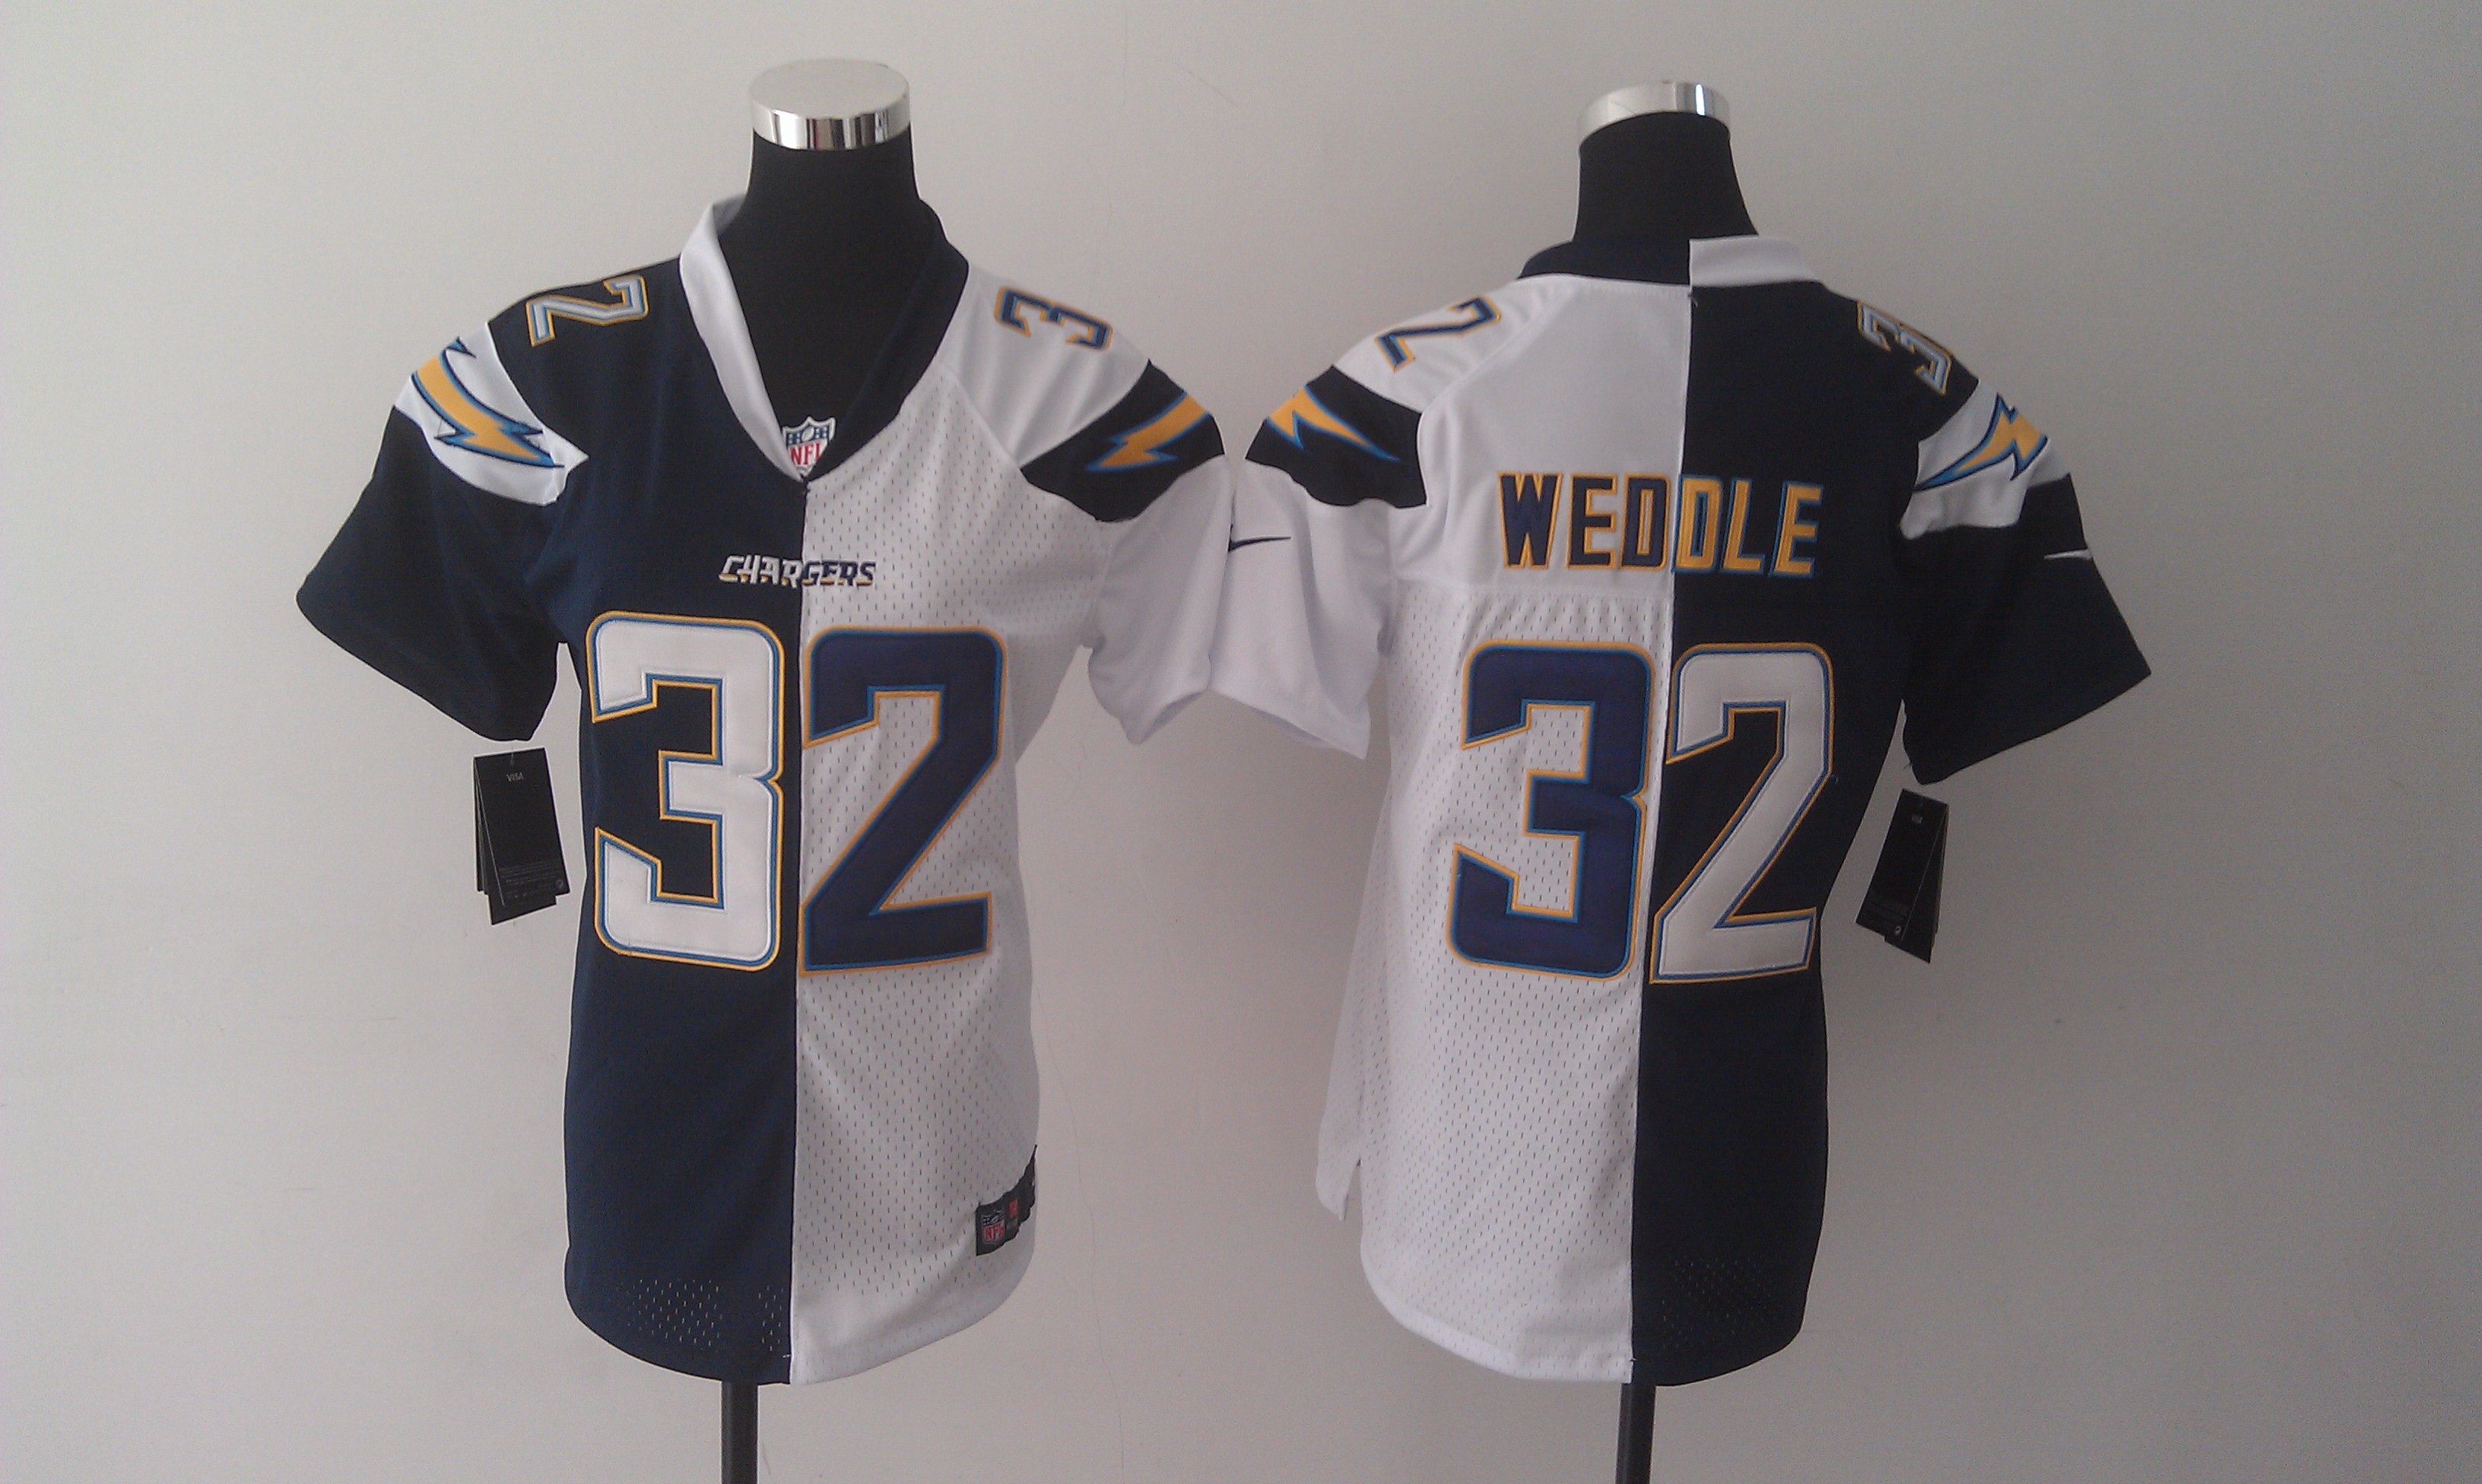 Nike Chargers 32 Weddle White And Blue Women Split Jerseys